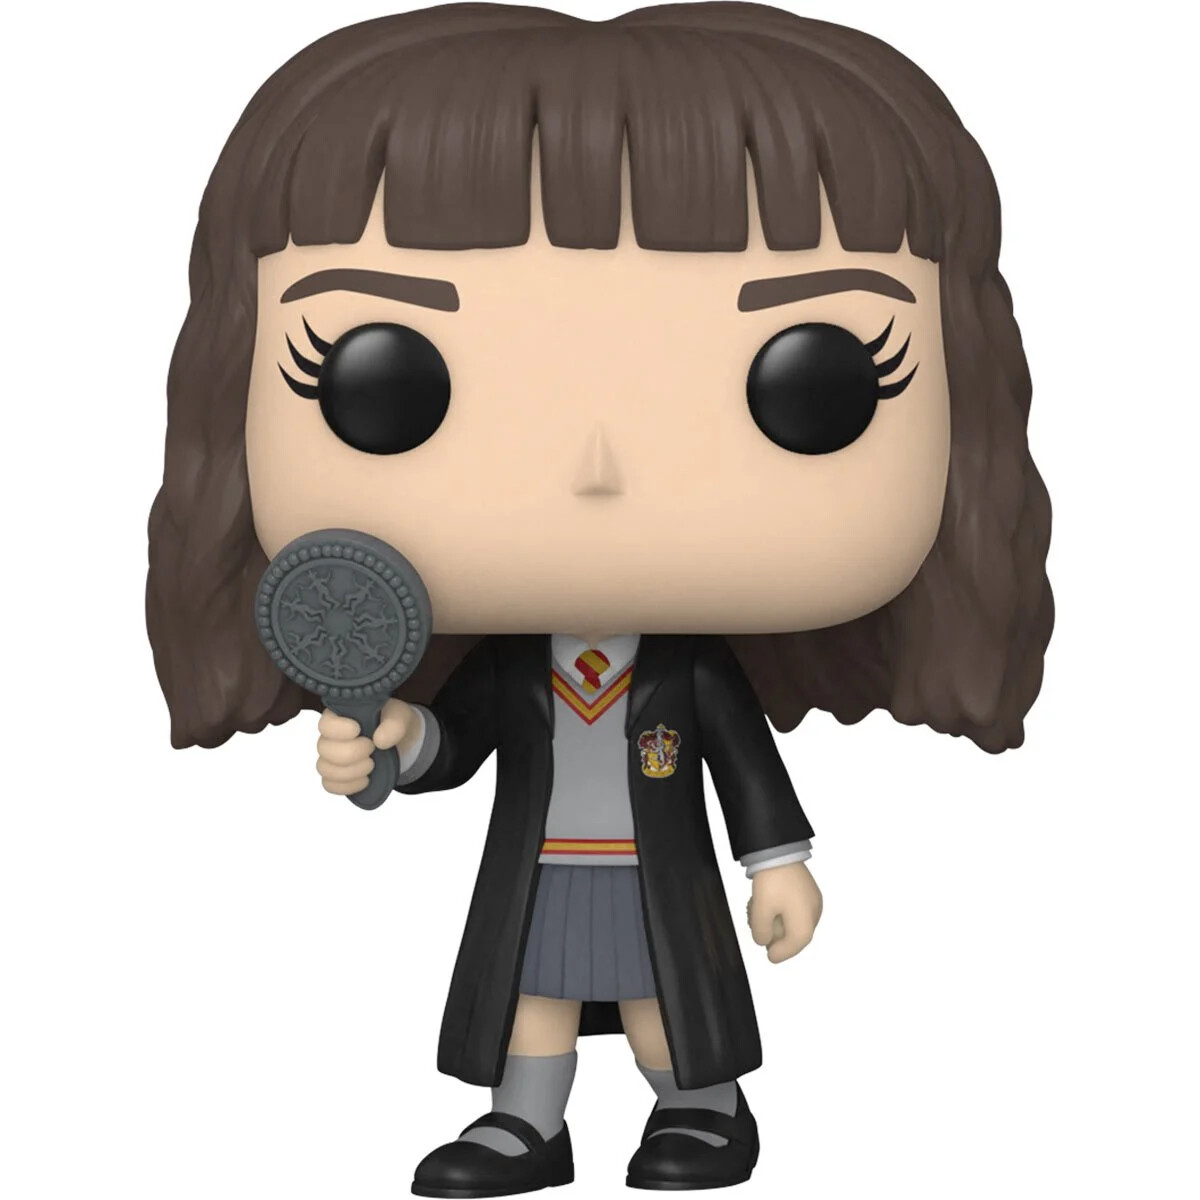 Funko Harry Potter and the Chamber of Secrets 20th Anniversary Hermione Granger Pop! Vinyl Figure